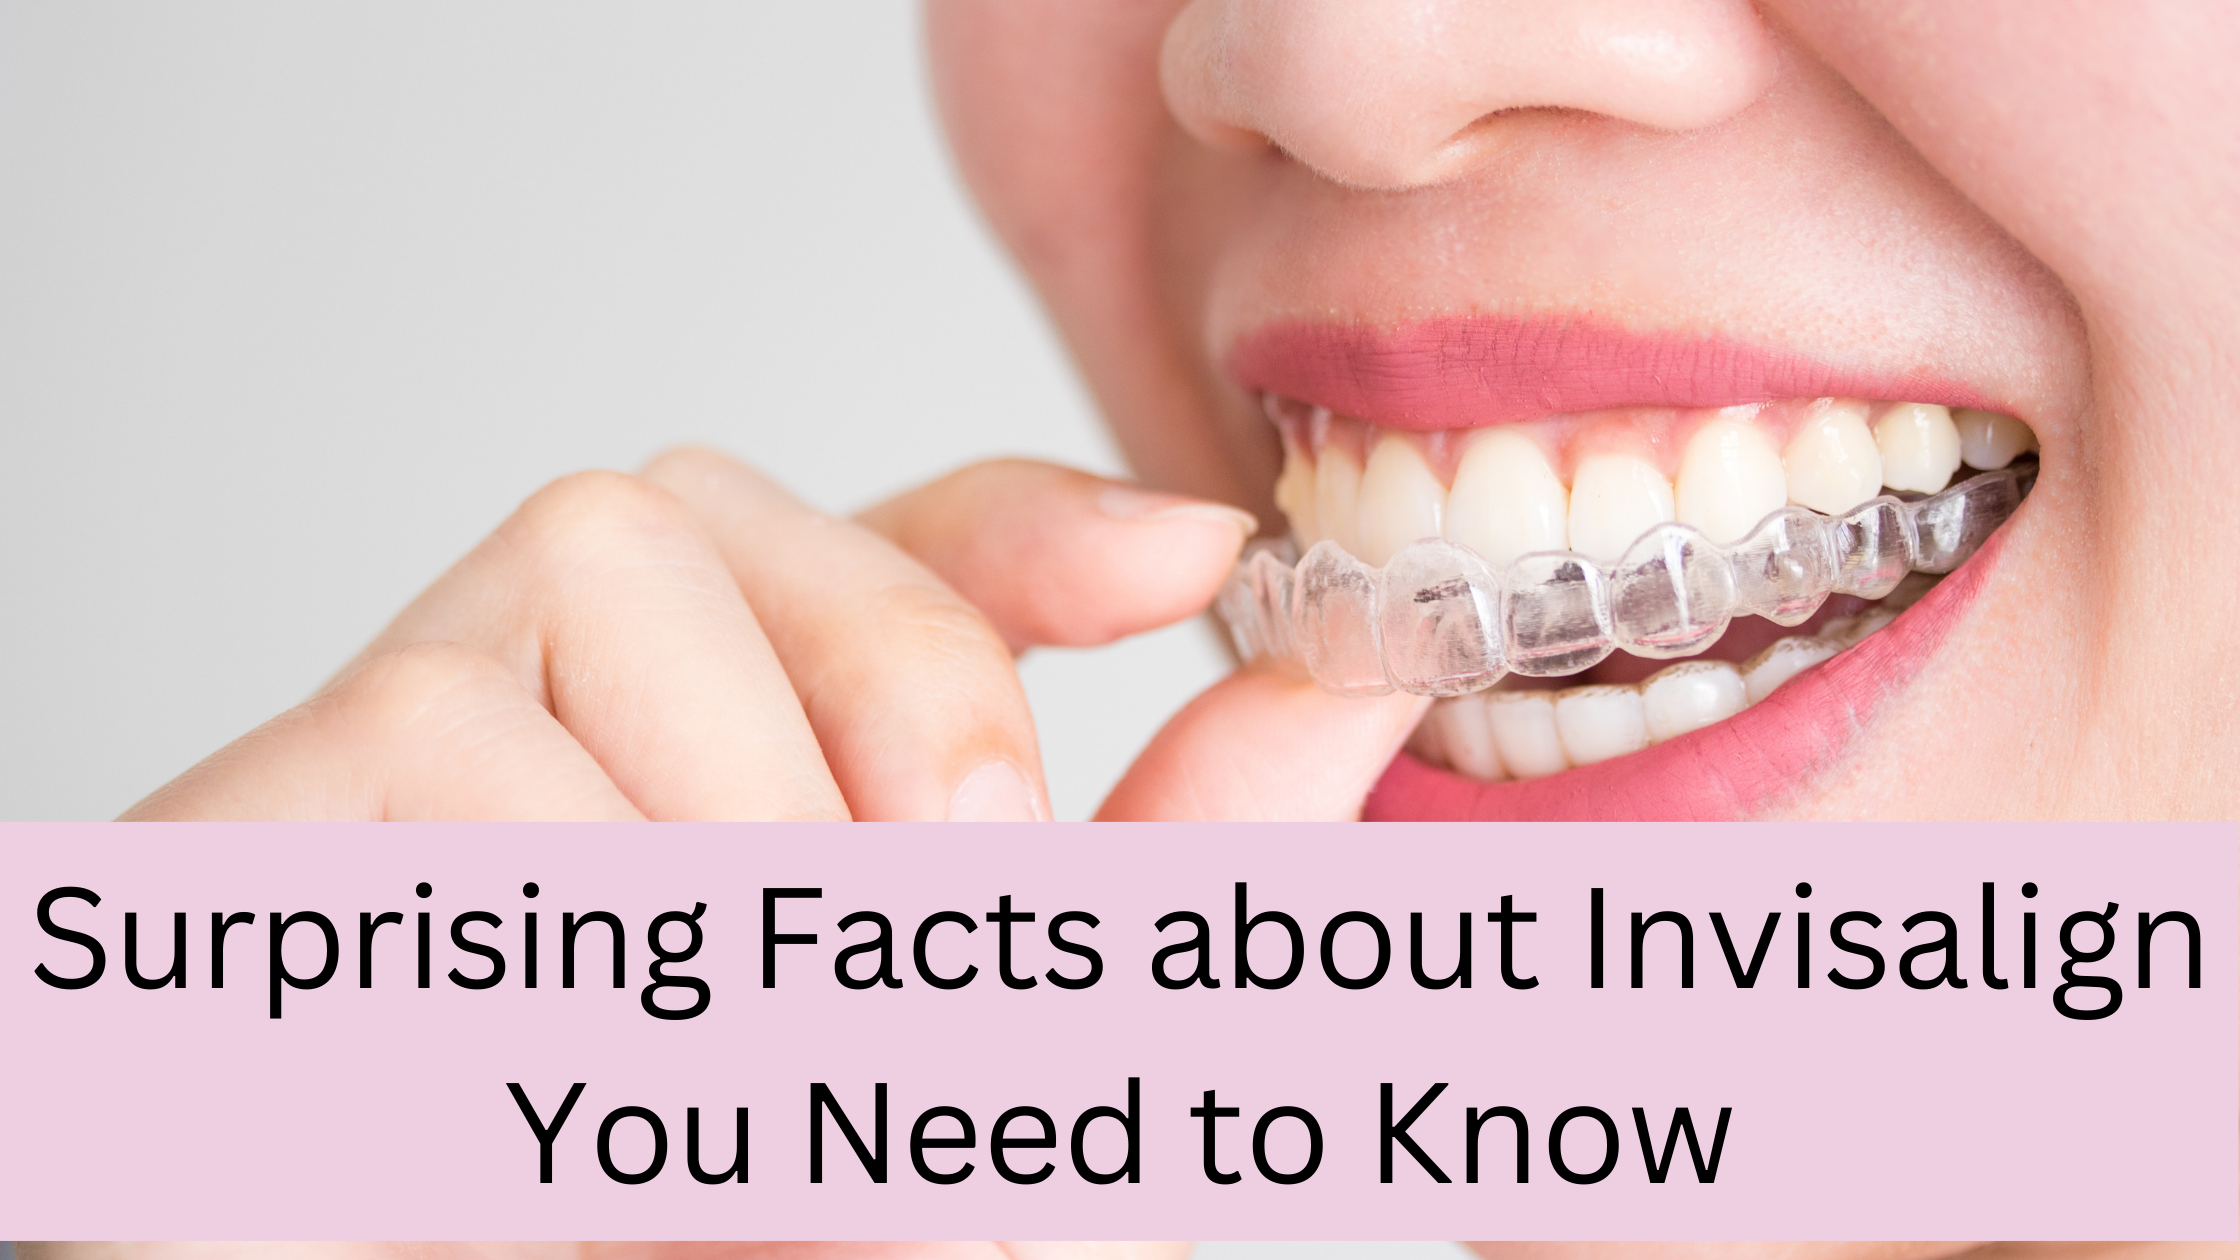 5 Benefits of Invisalign Clear Aligners for Straightening Your